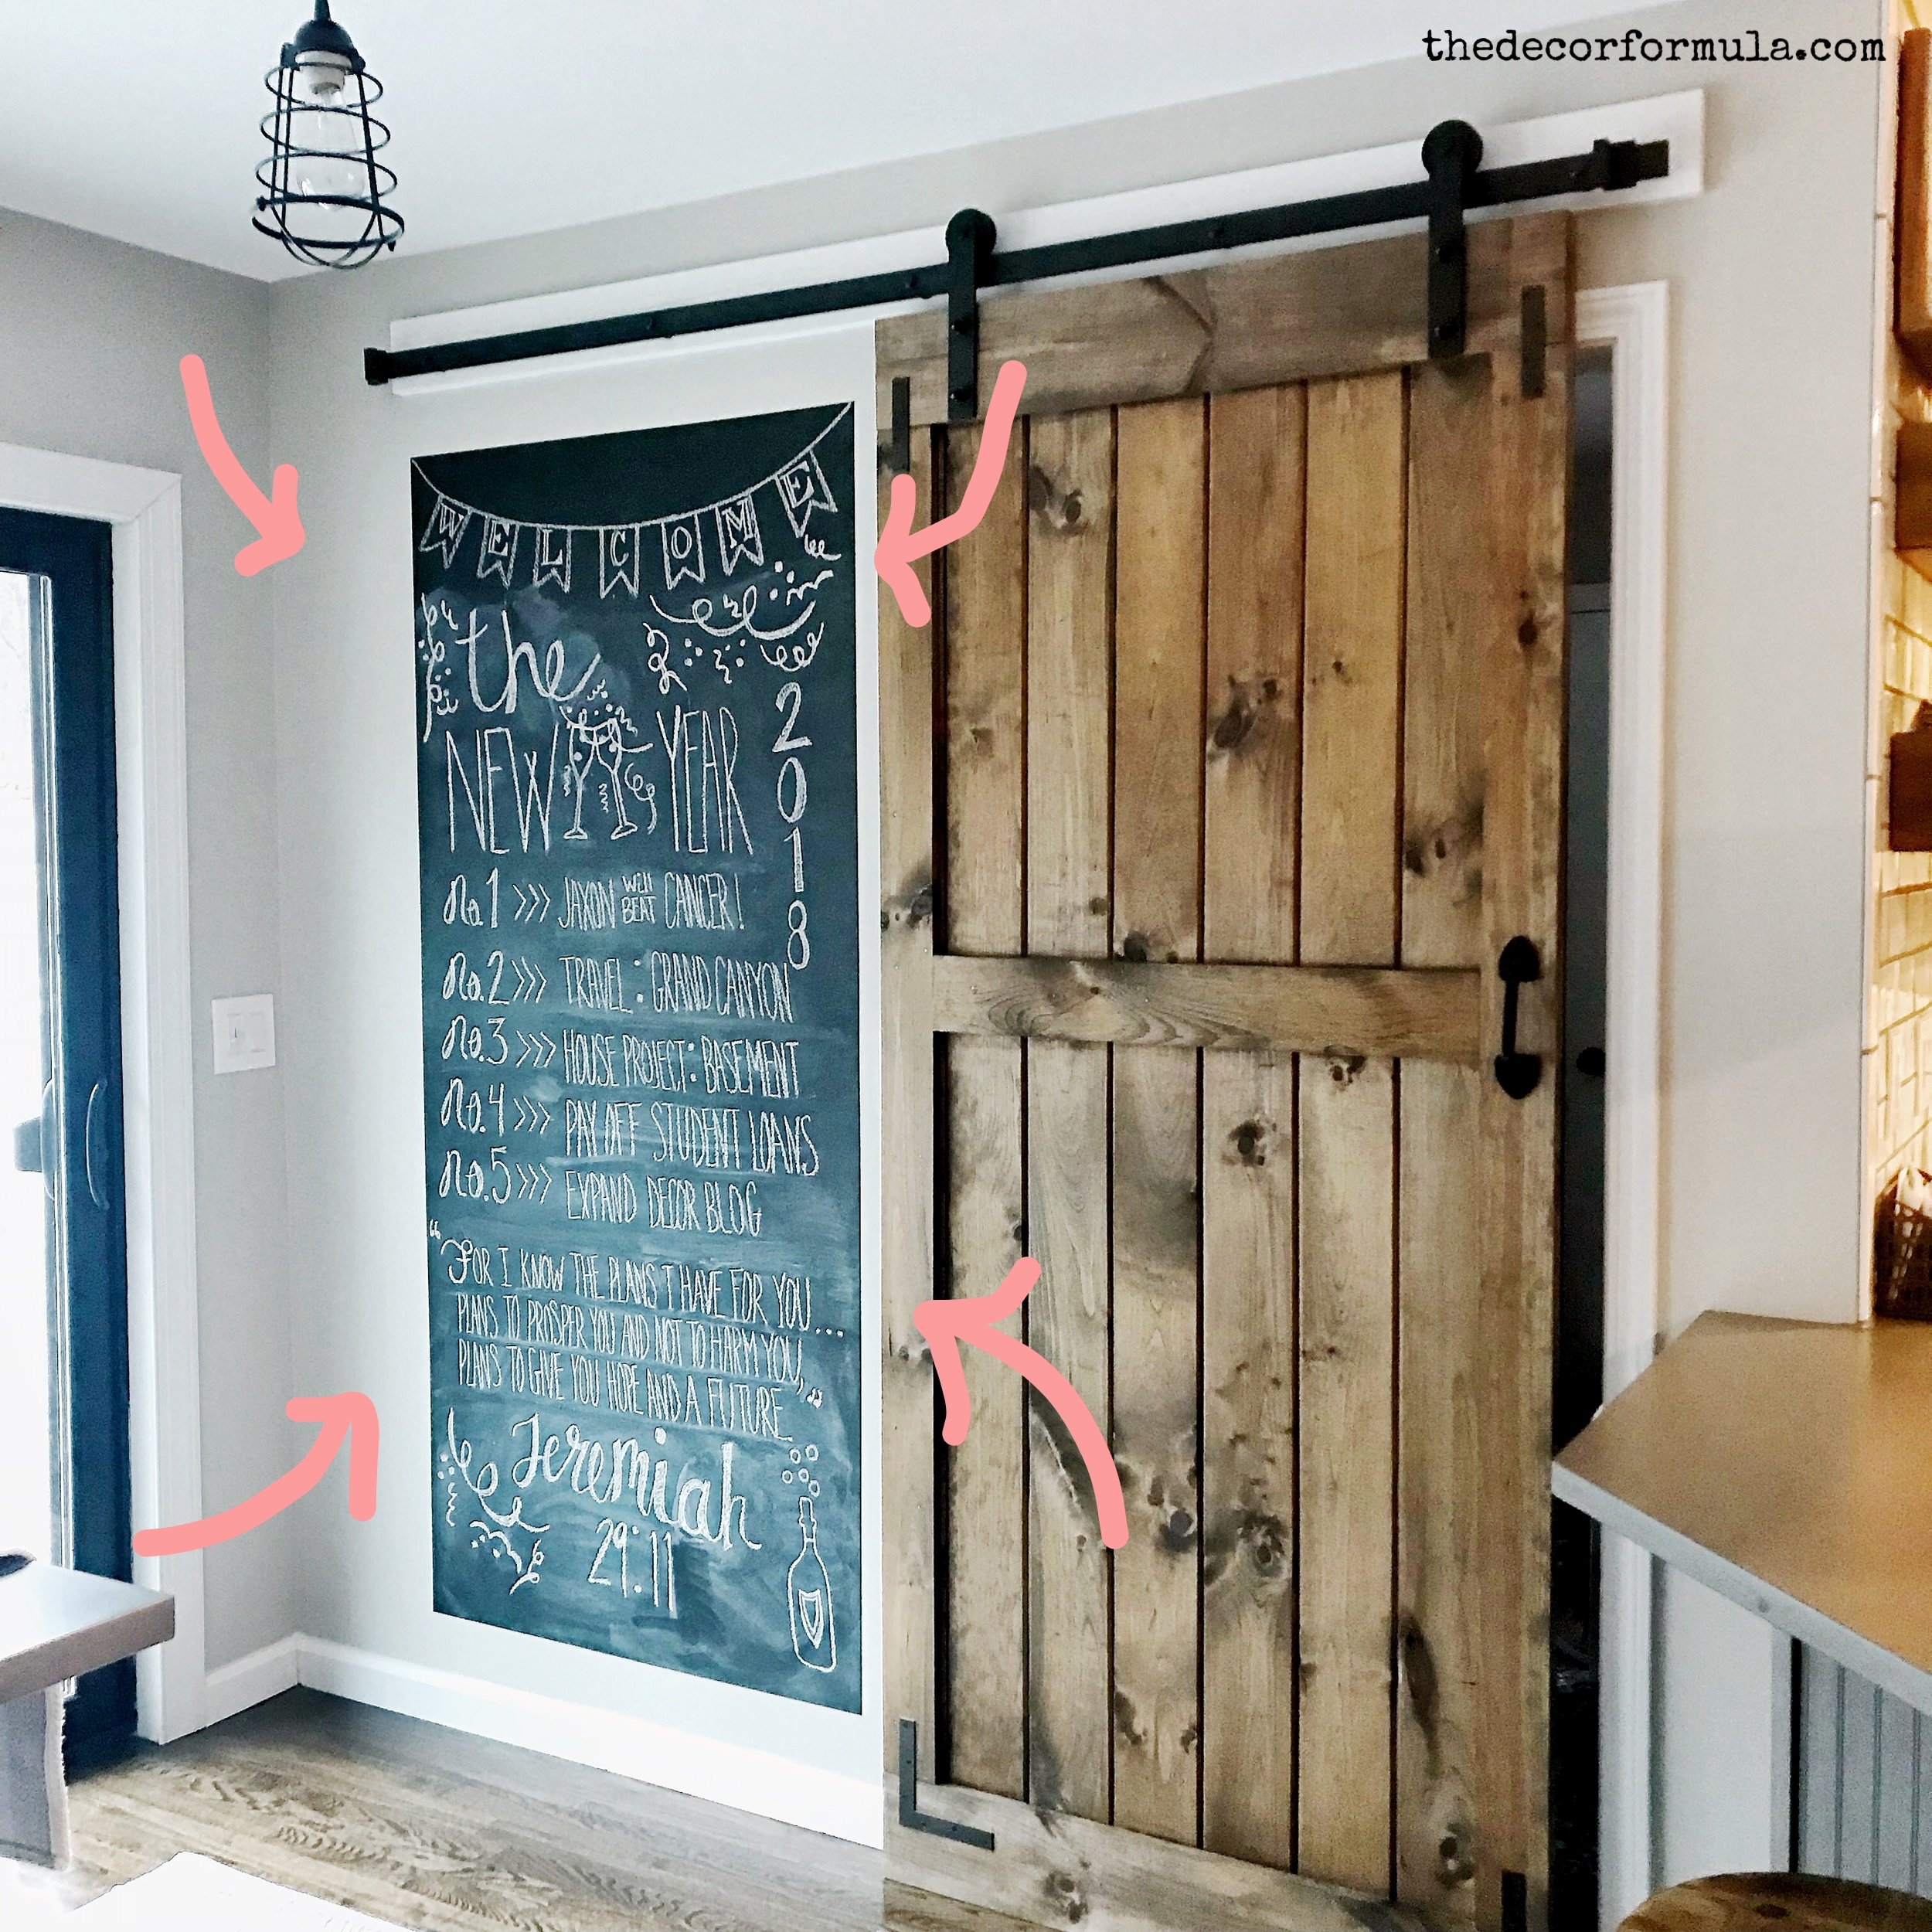 Chalkboard Walls How To Create A Chalkboard Magnetic Wall The Decor Formula